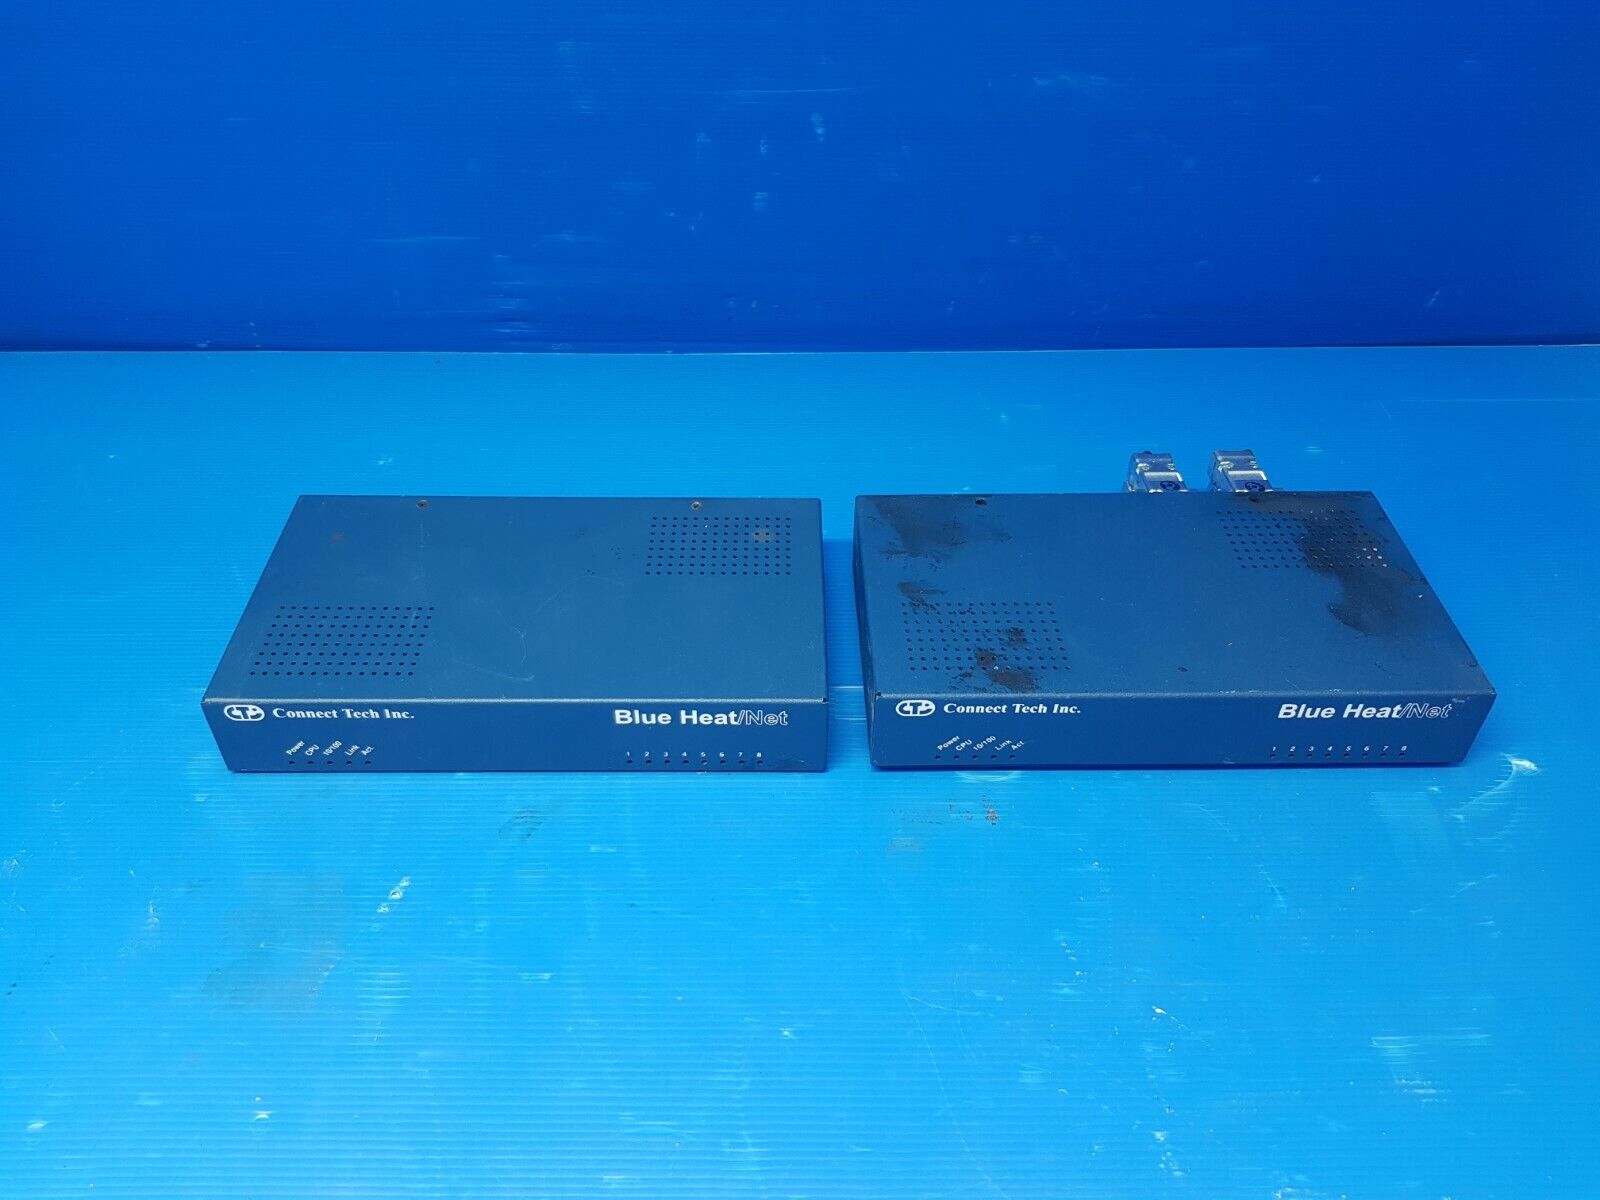 CTI Connect Tech Inc Blue Heat/Net, 9D,8 Port, With Surge BNG627 Lot of 2